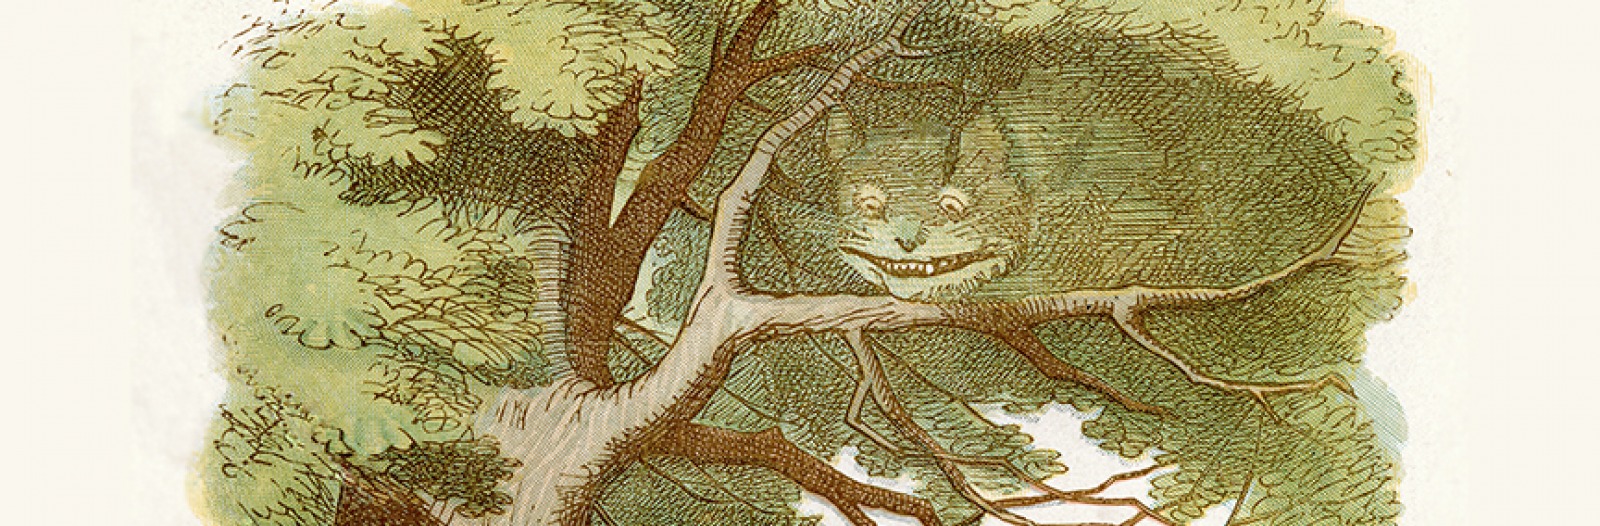 Illustration of the Cheshire Cat in a tree from Alice in Wonderland